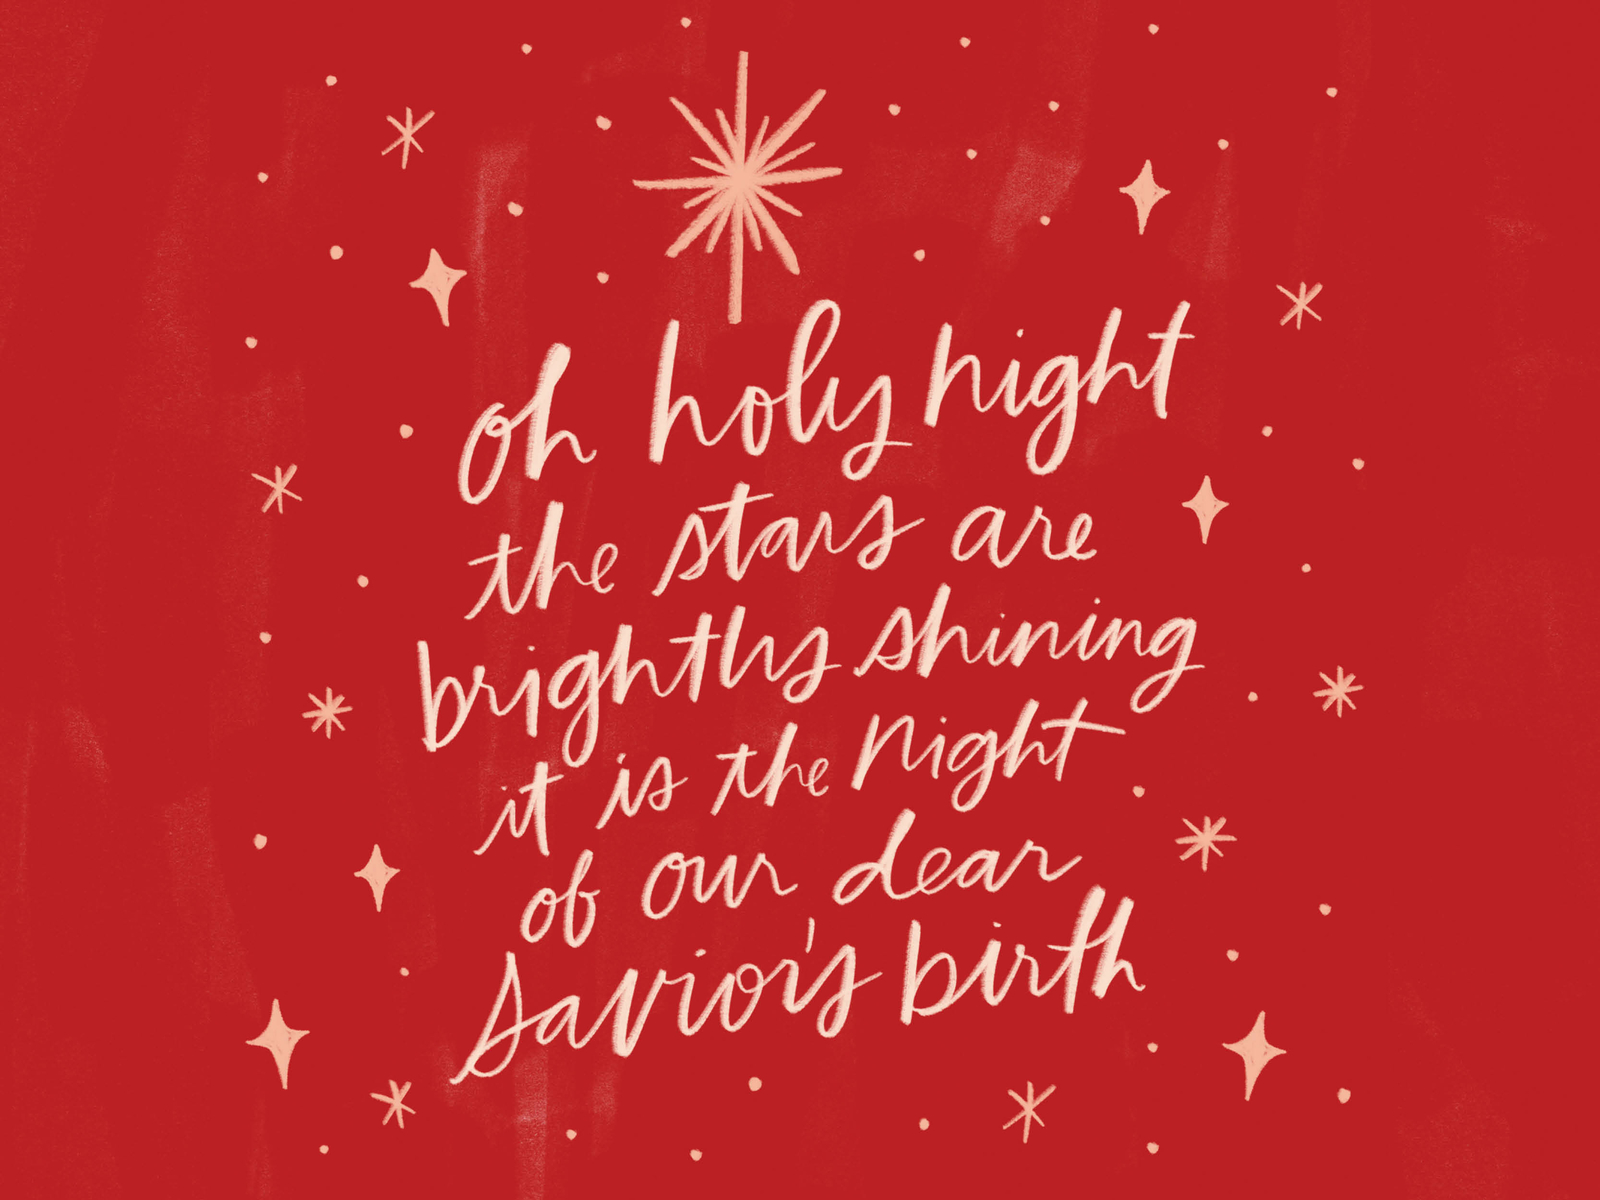 Oh Holy Night by Kercia Jane on Dribbble